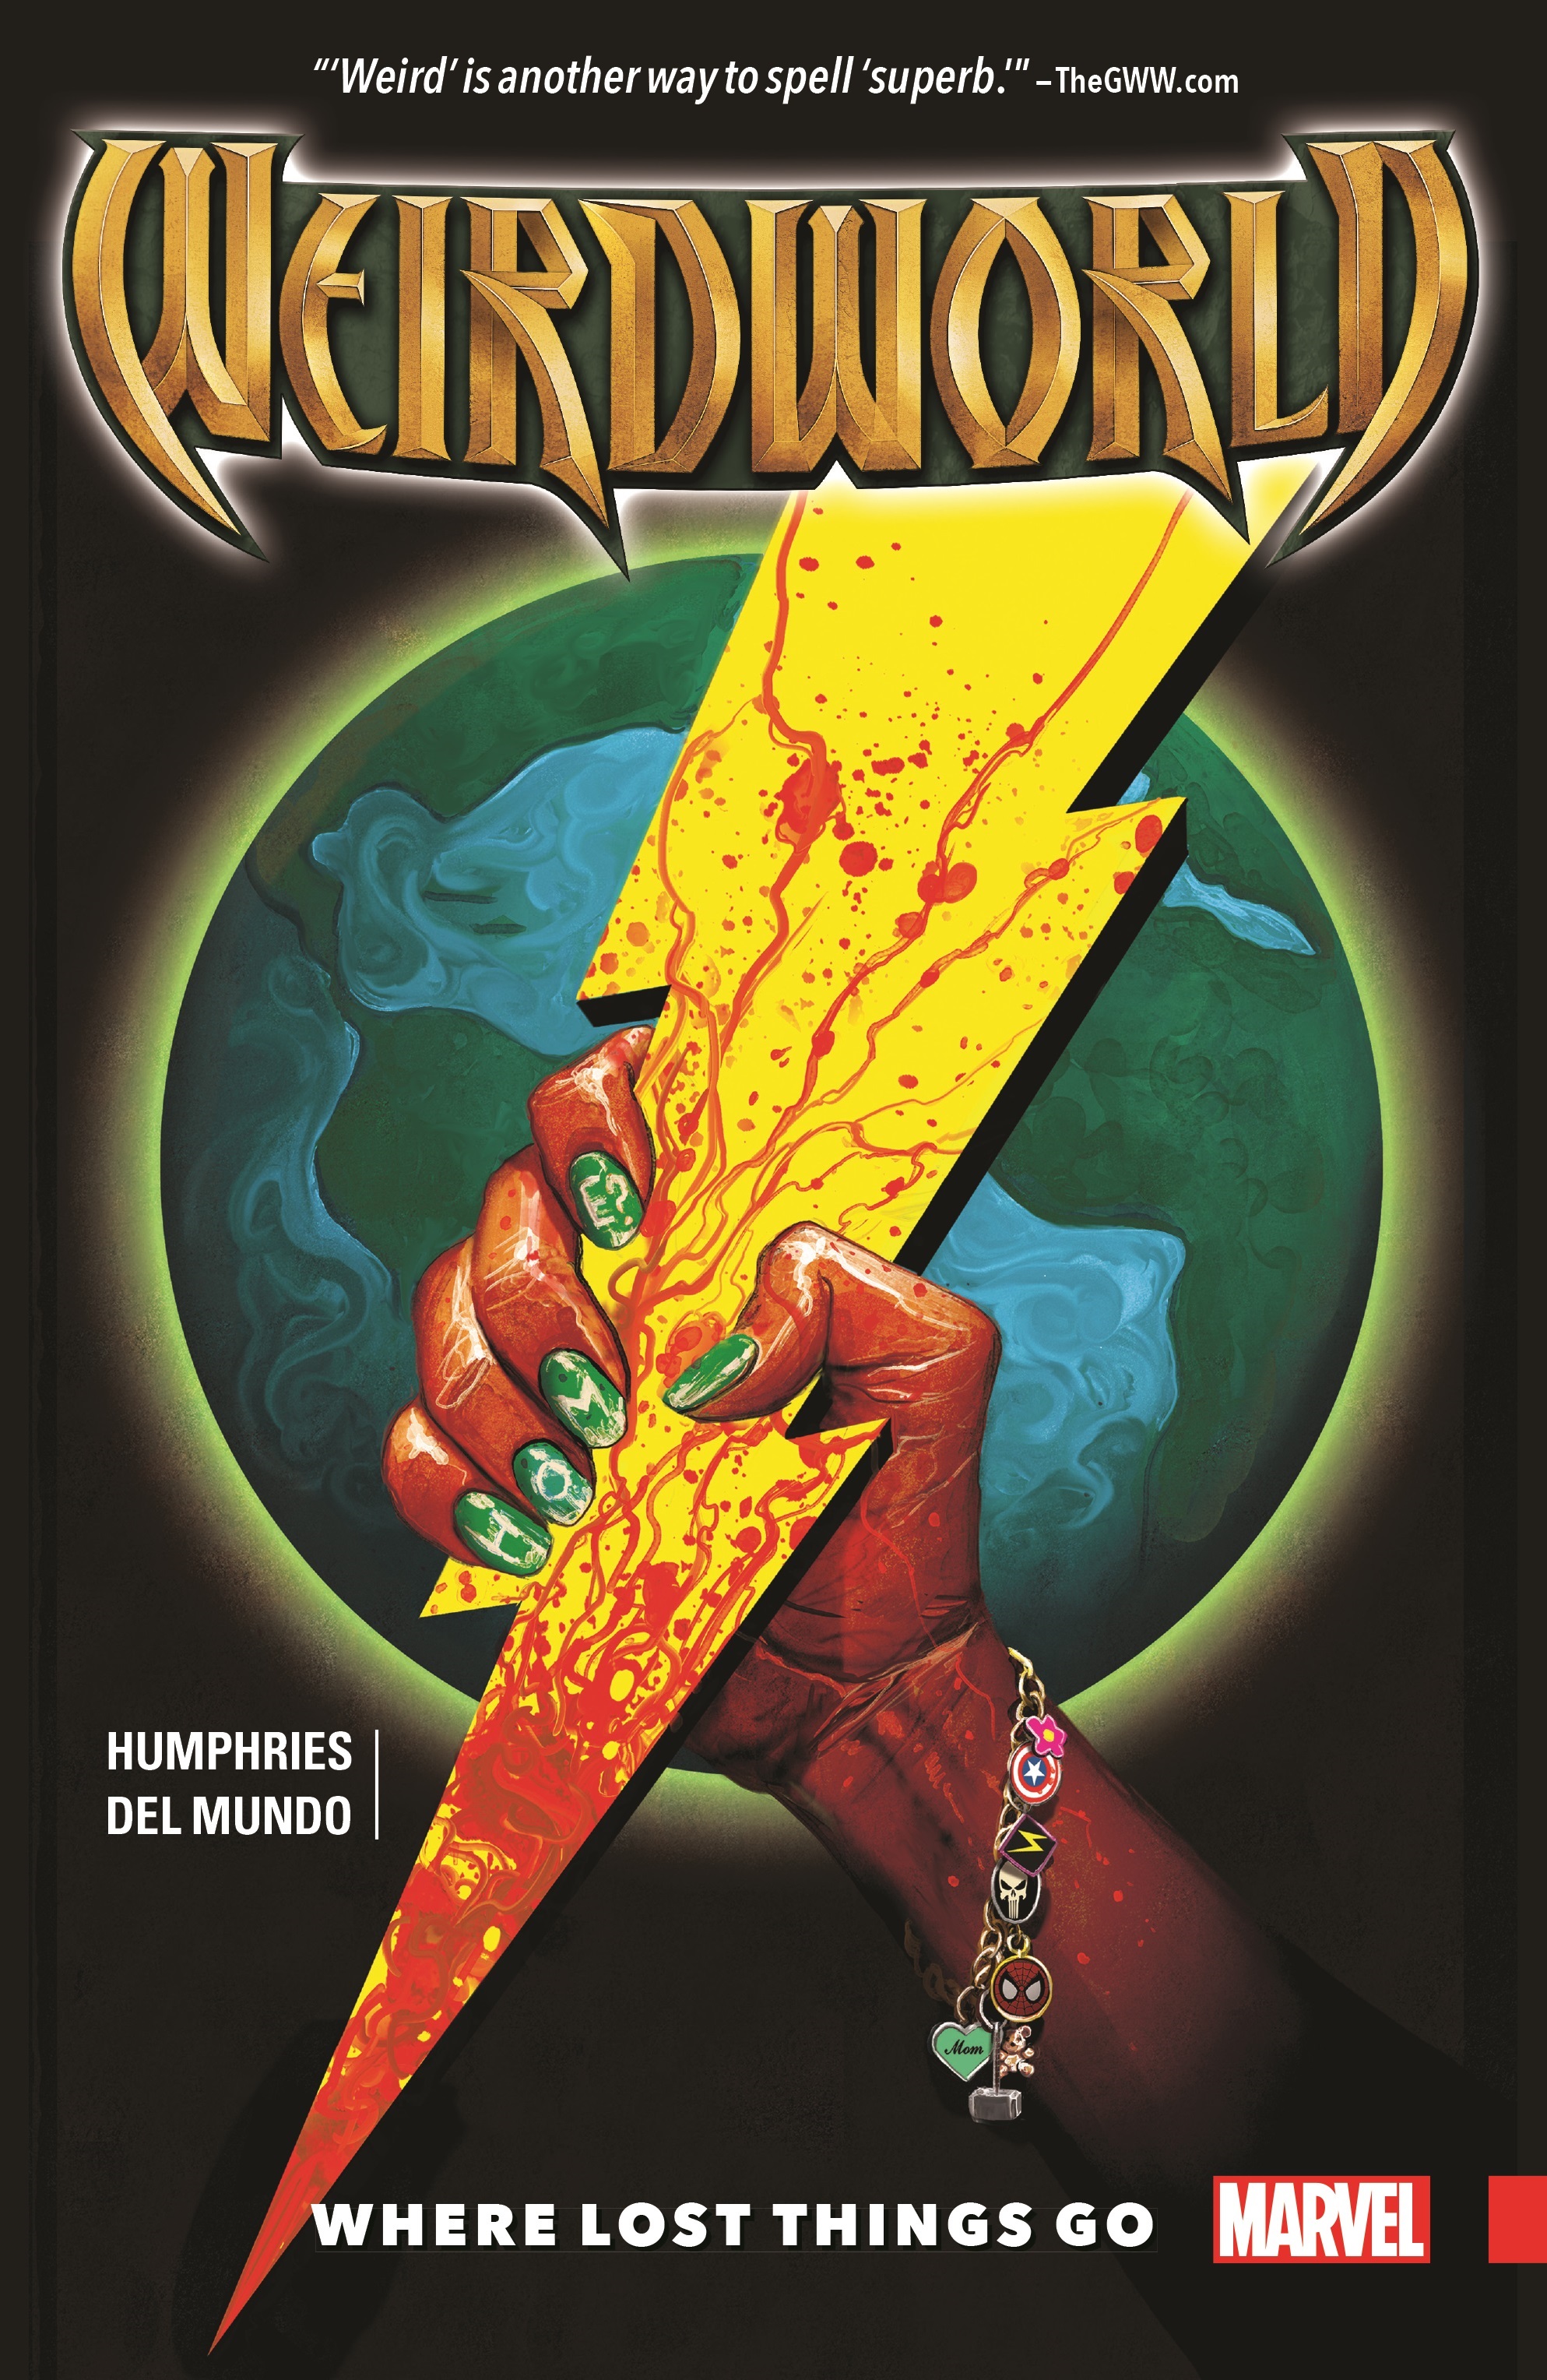 Weirdworld Vol. 1: Where Lost Things Go (Trade Paperback)